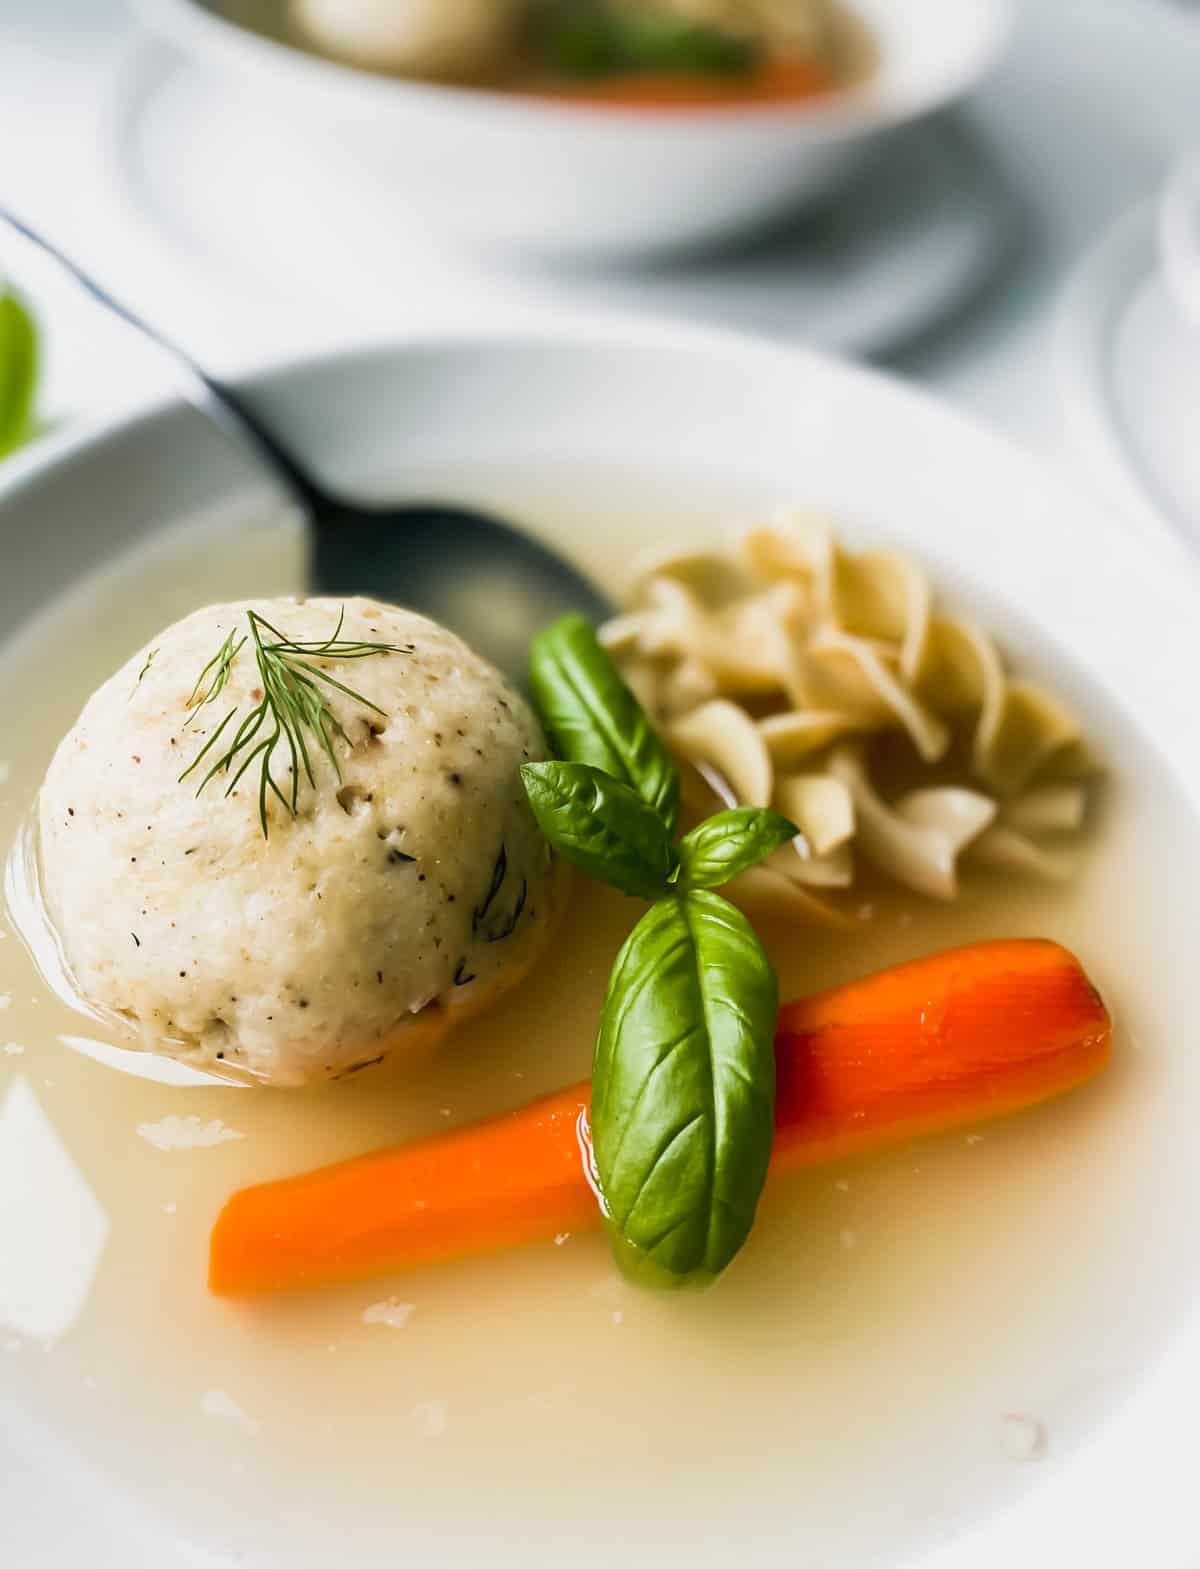 matzo ball soup in a white bowl with a spoon, noodles, and a carrot